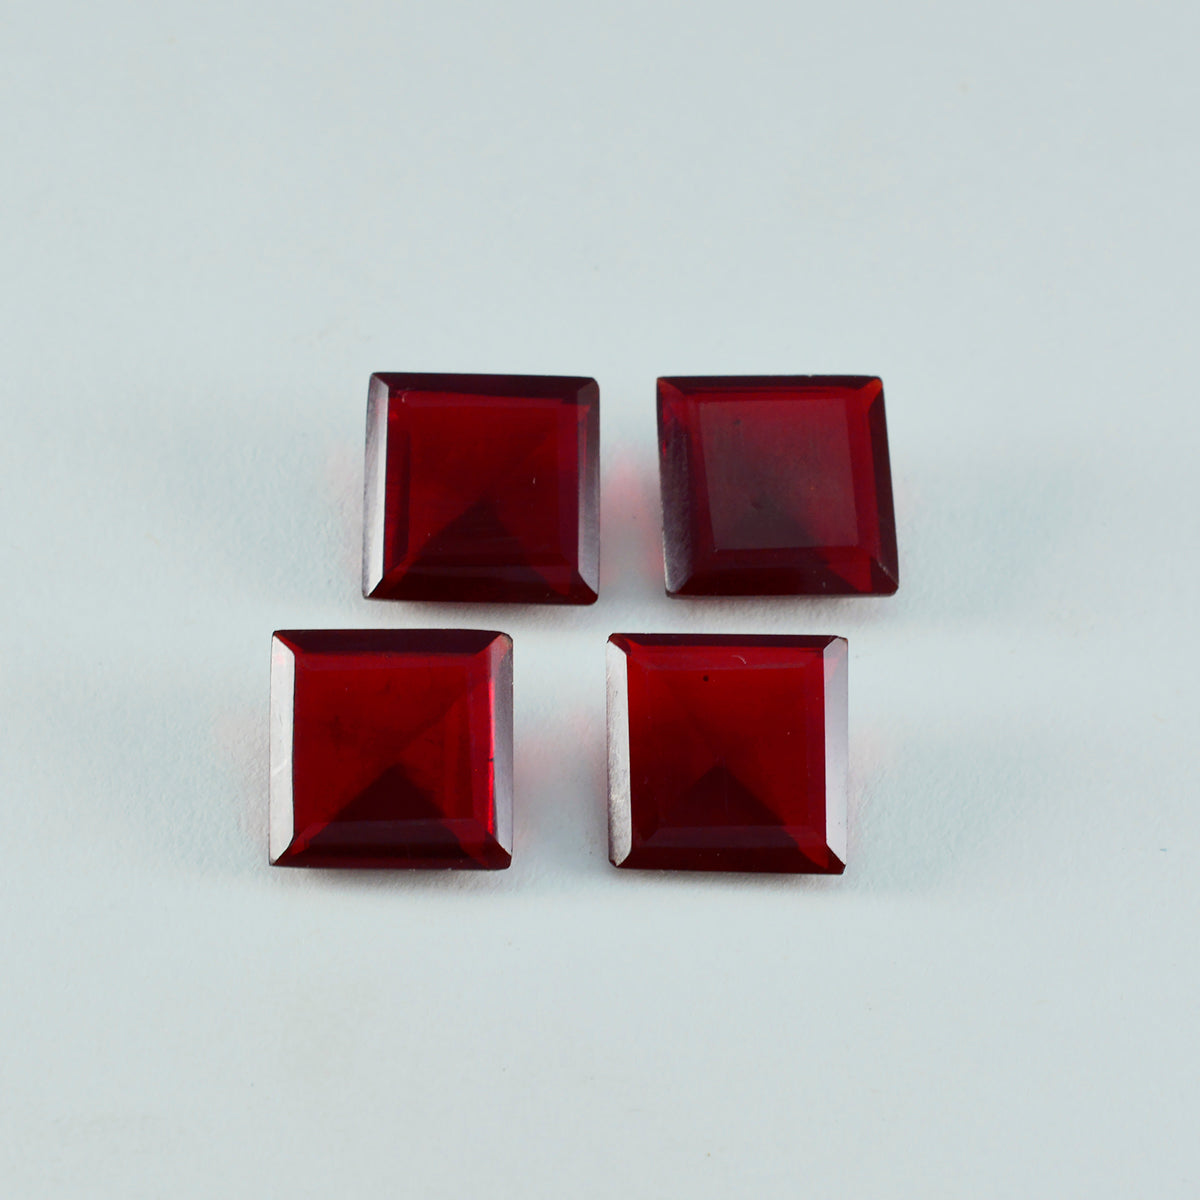 Riyogems 1PC Red Ruby CZ Faceted 15x15 mm Square Shape cute Quality Stone